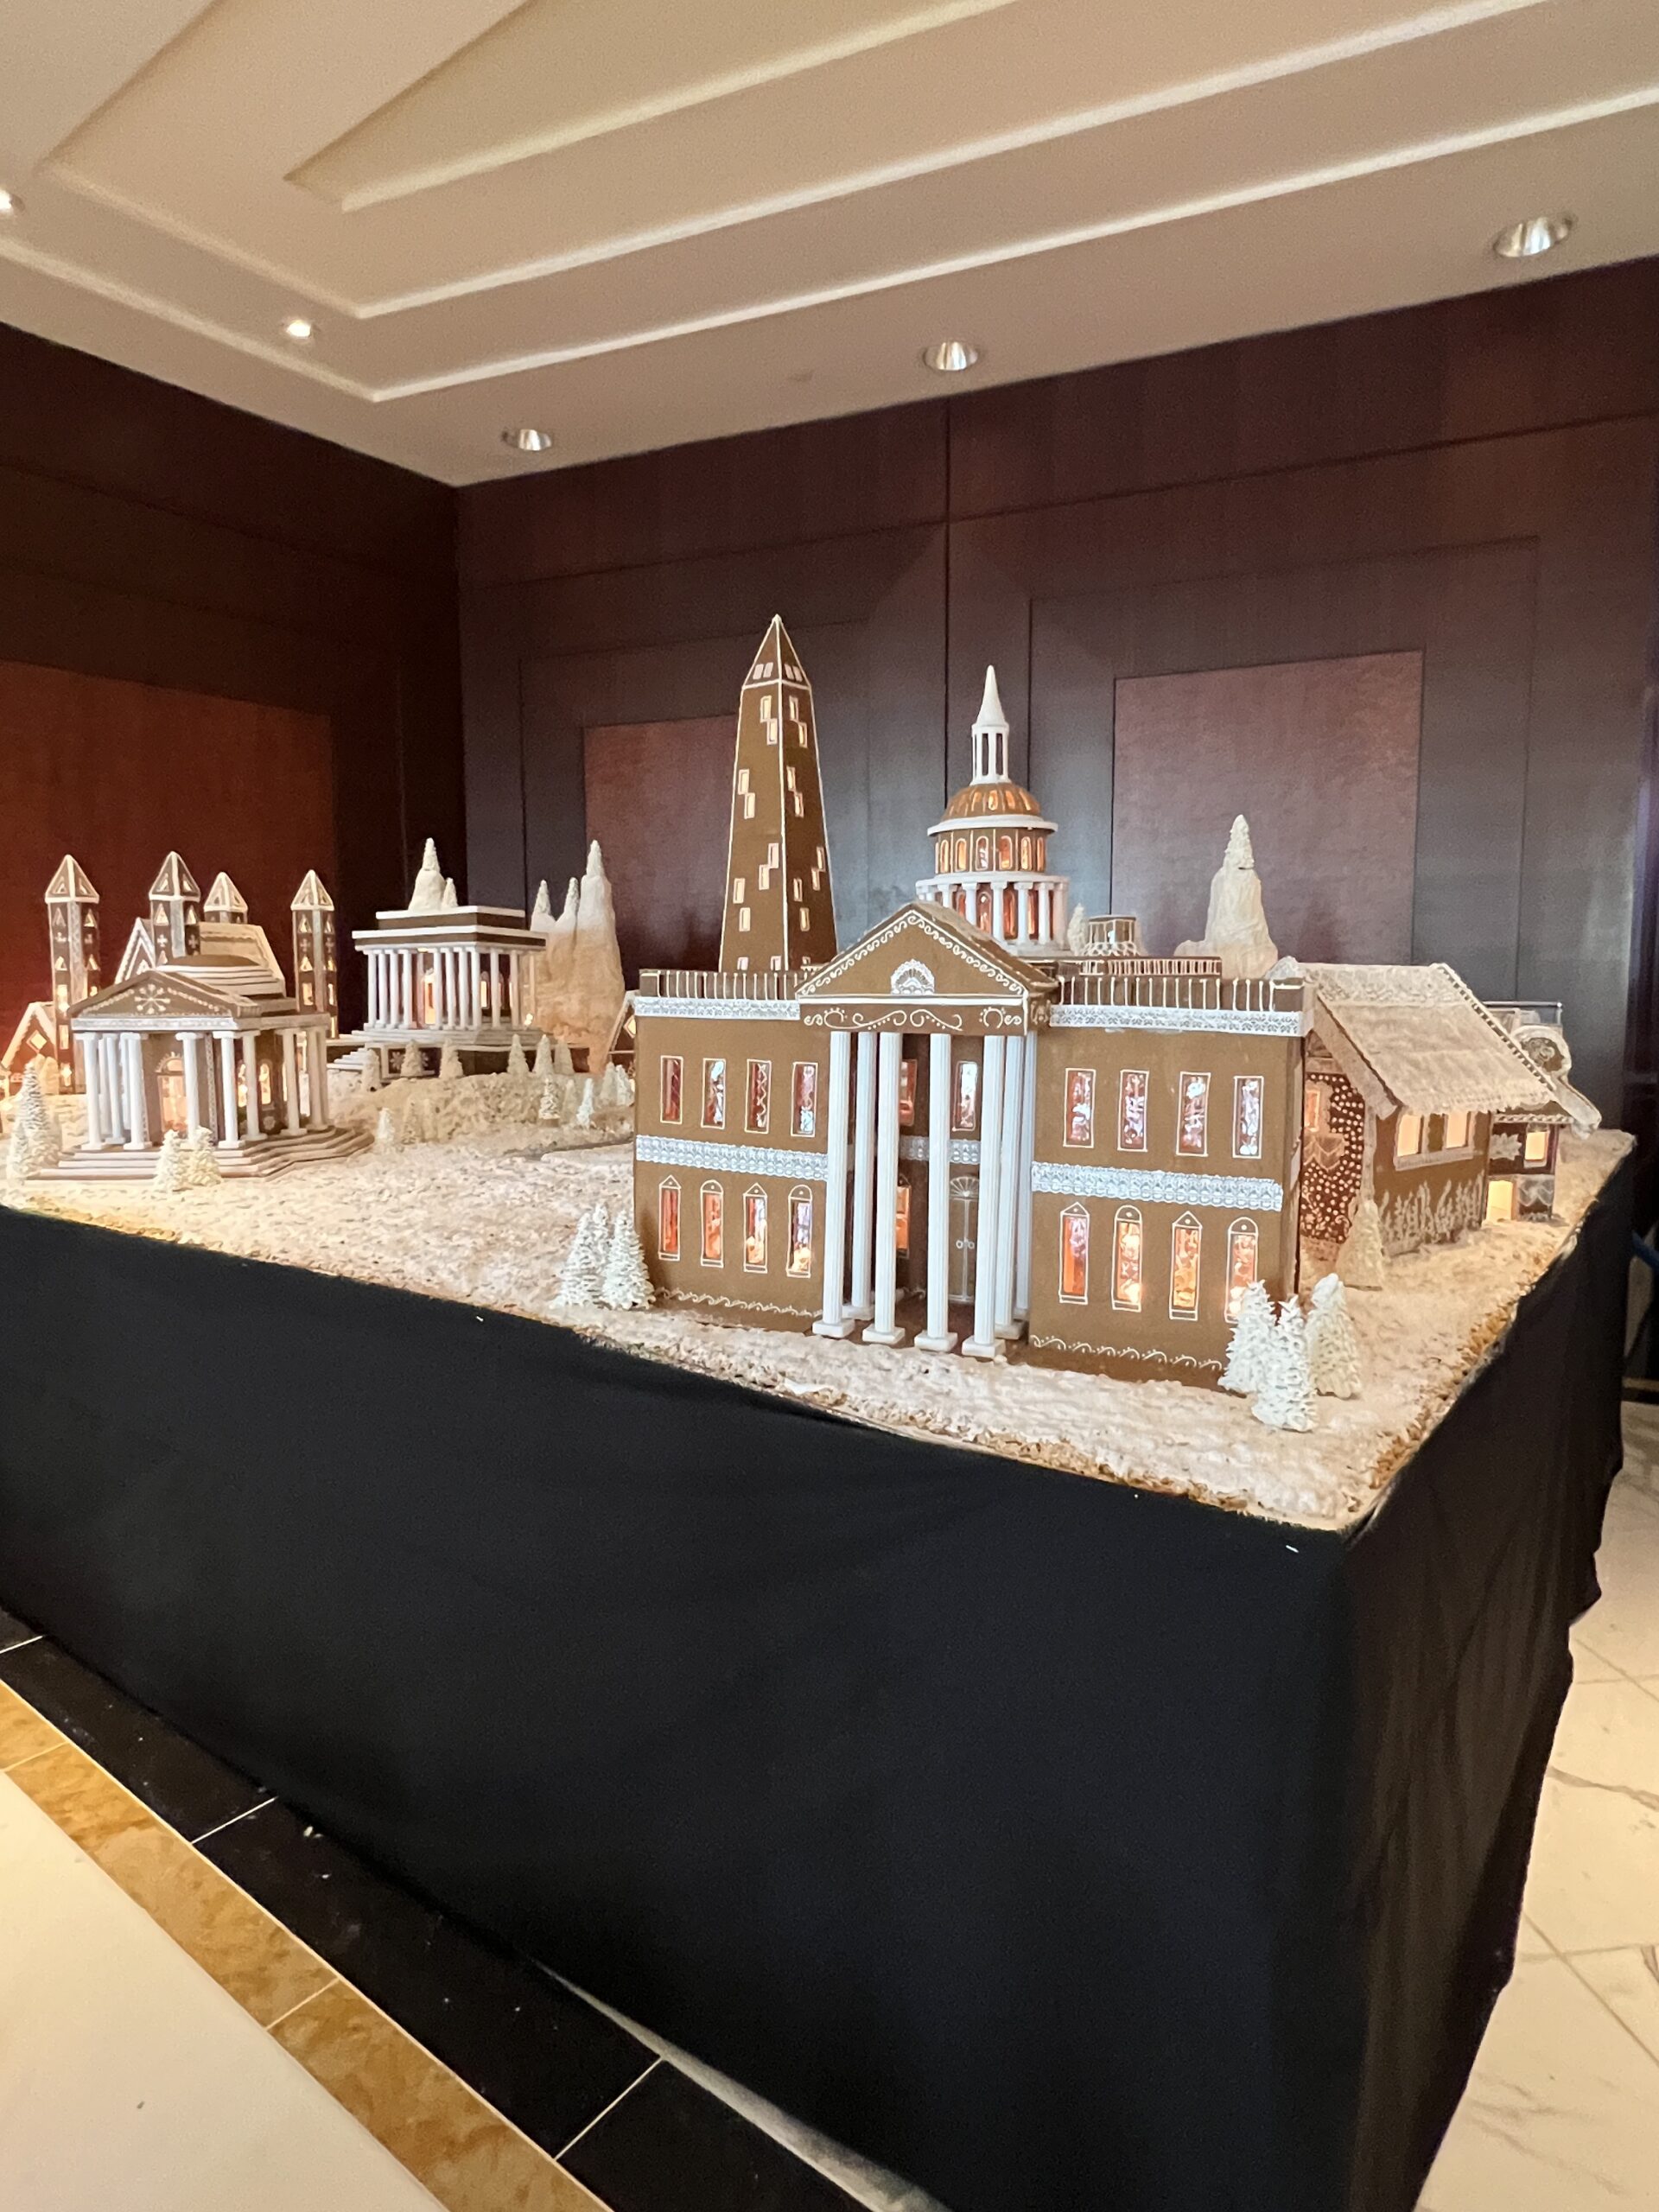 Gingerbread village of buildings and landmarks in Gaylord National Resort Lobby